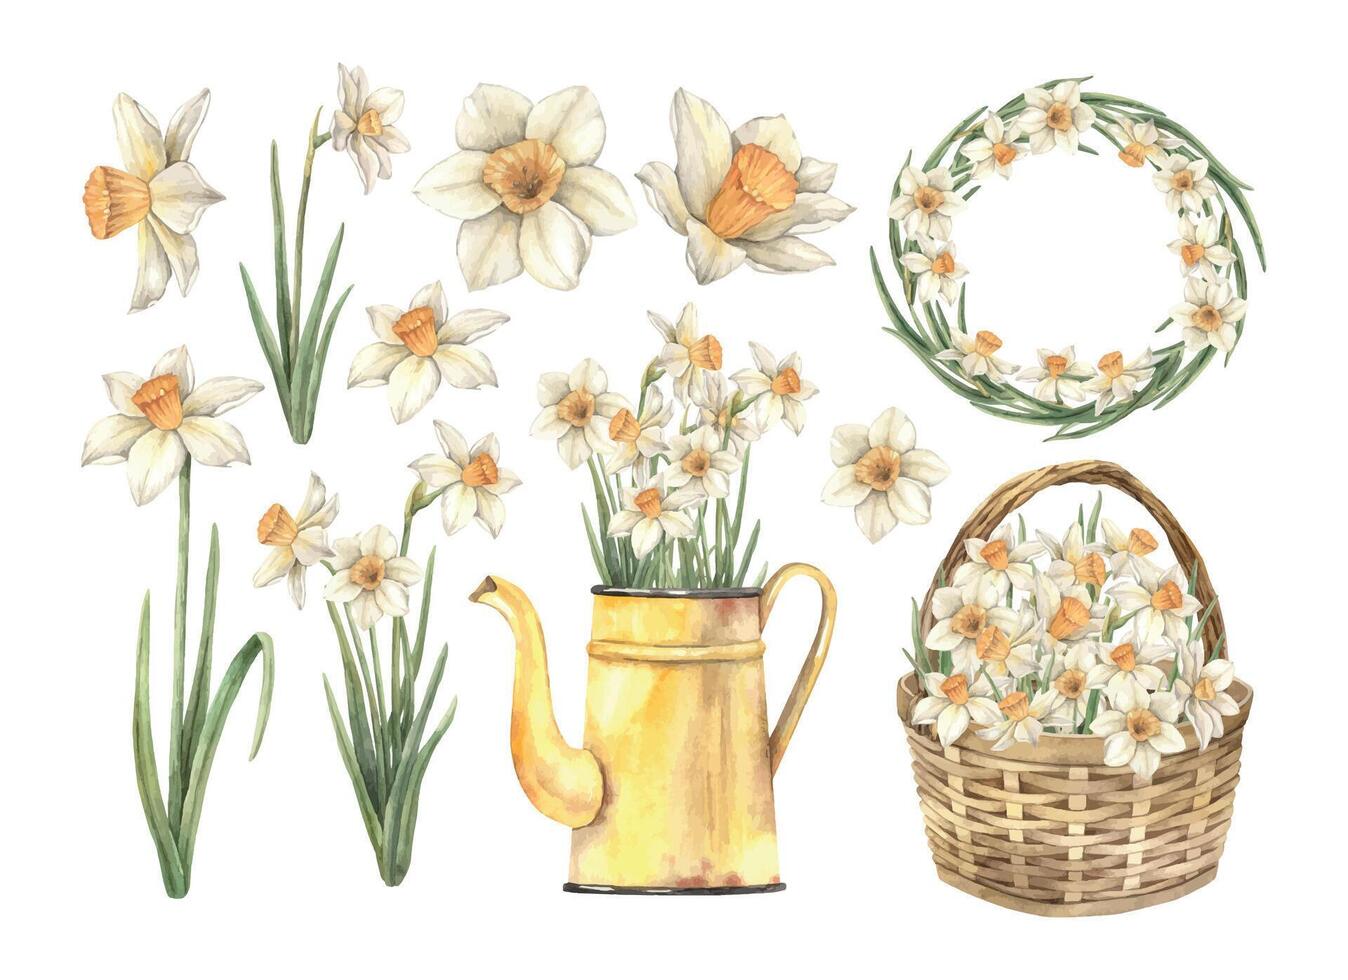 Watercolor set with daffodils, wicker basket, yellow watering can with flowers, wreath. Hand drawn illustrations on isolated background for greeting cards, invitations, happy holidays, posters vector